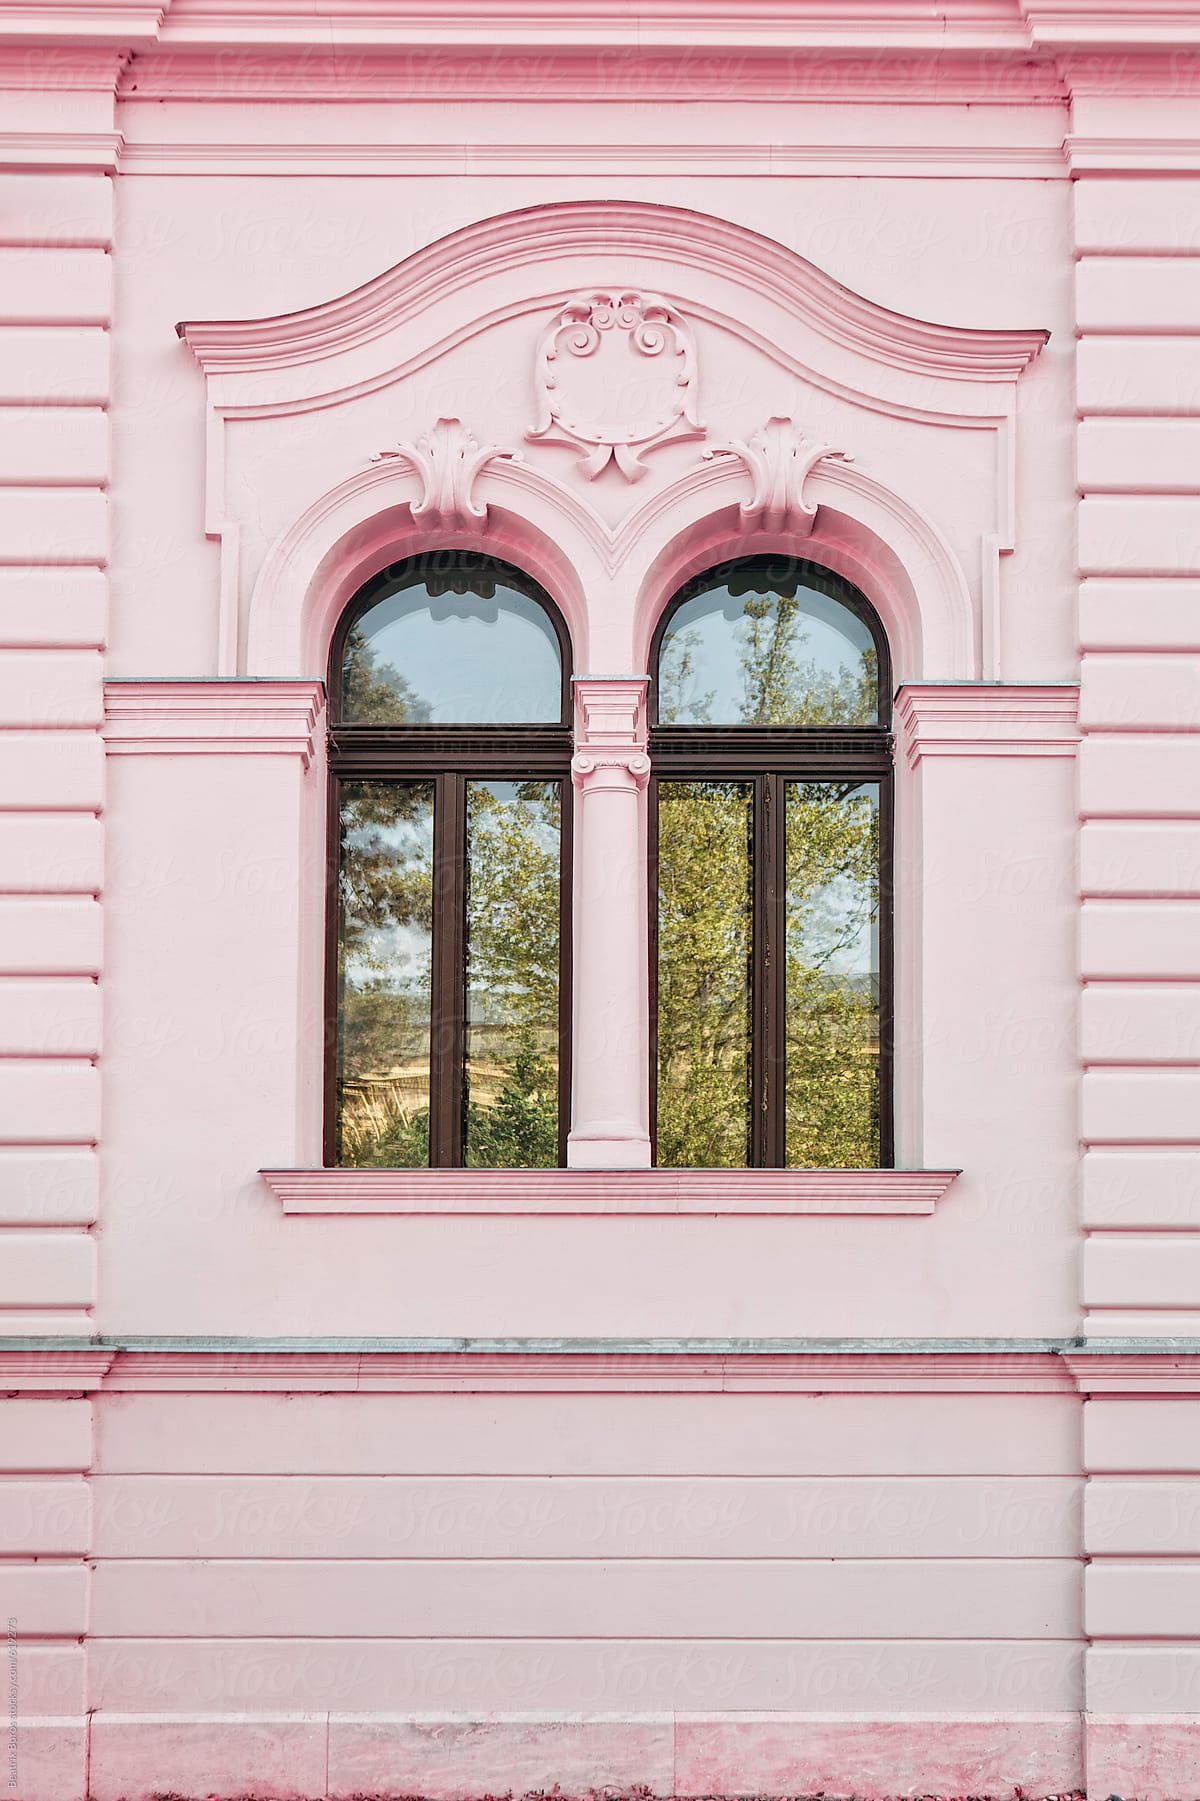 Wall of a pink building with two twin windows